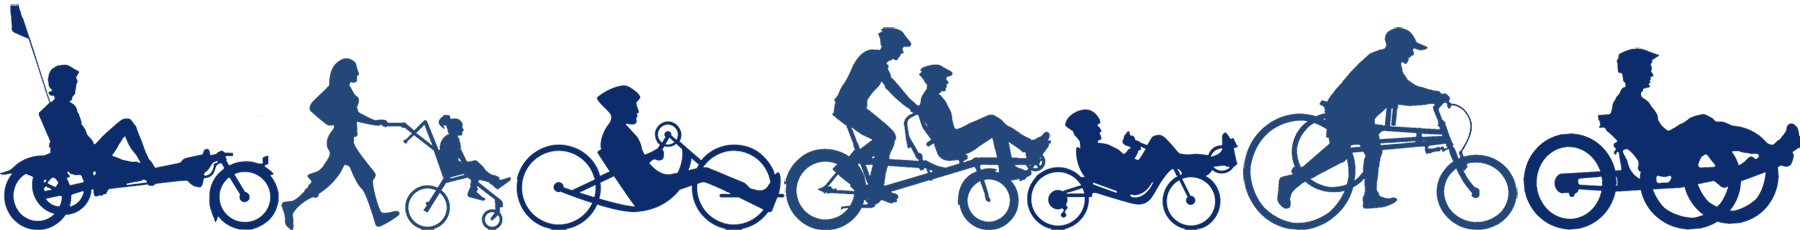 silhouettes of people using trikes, push chairs, tandem bikes, handcycles and frame runners